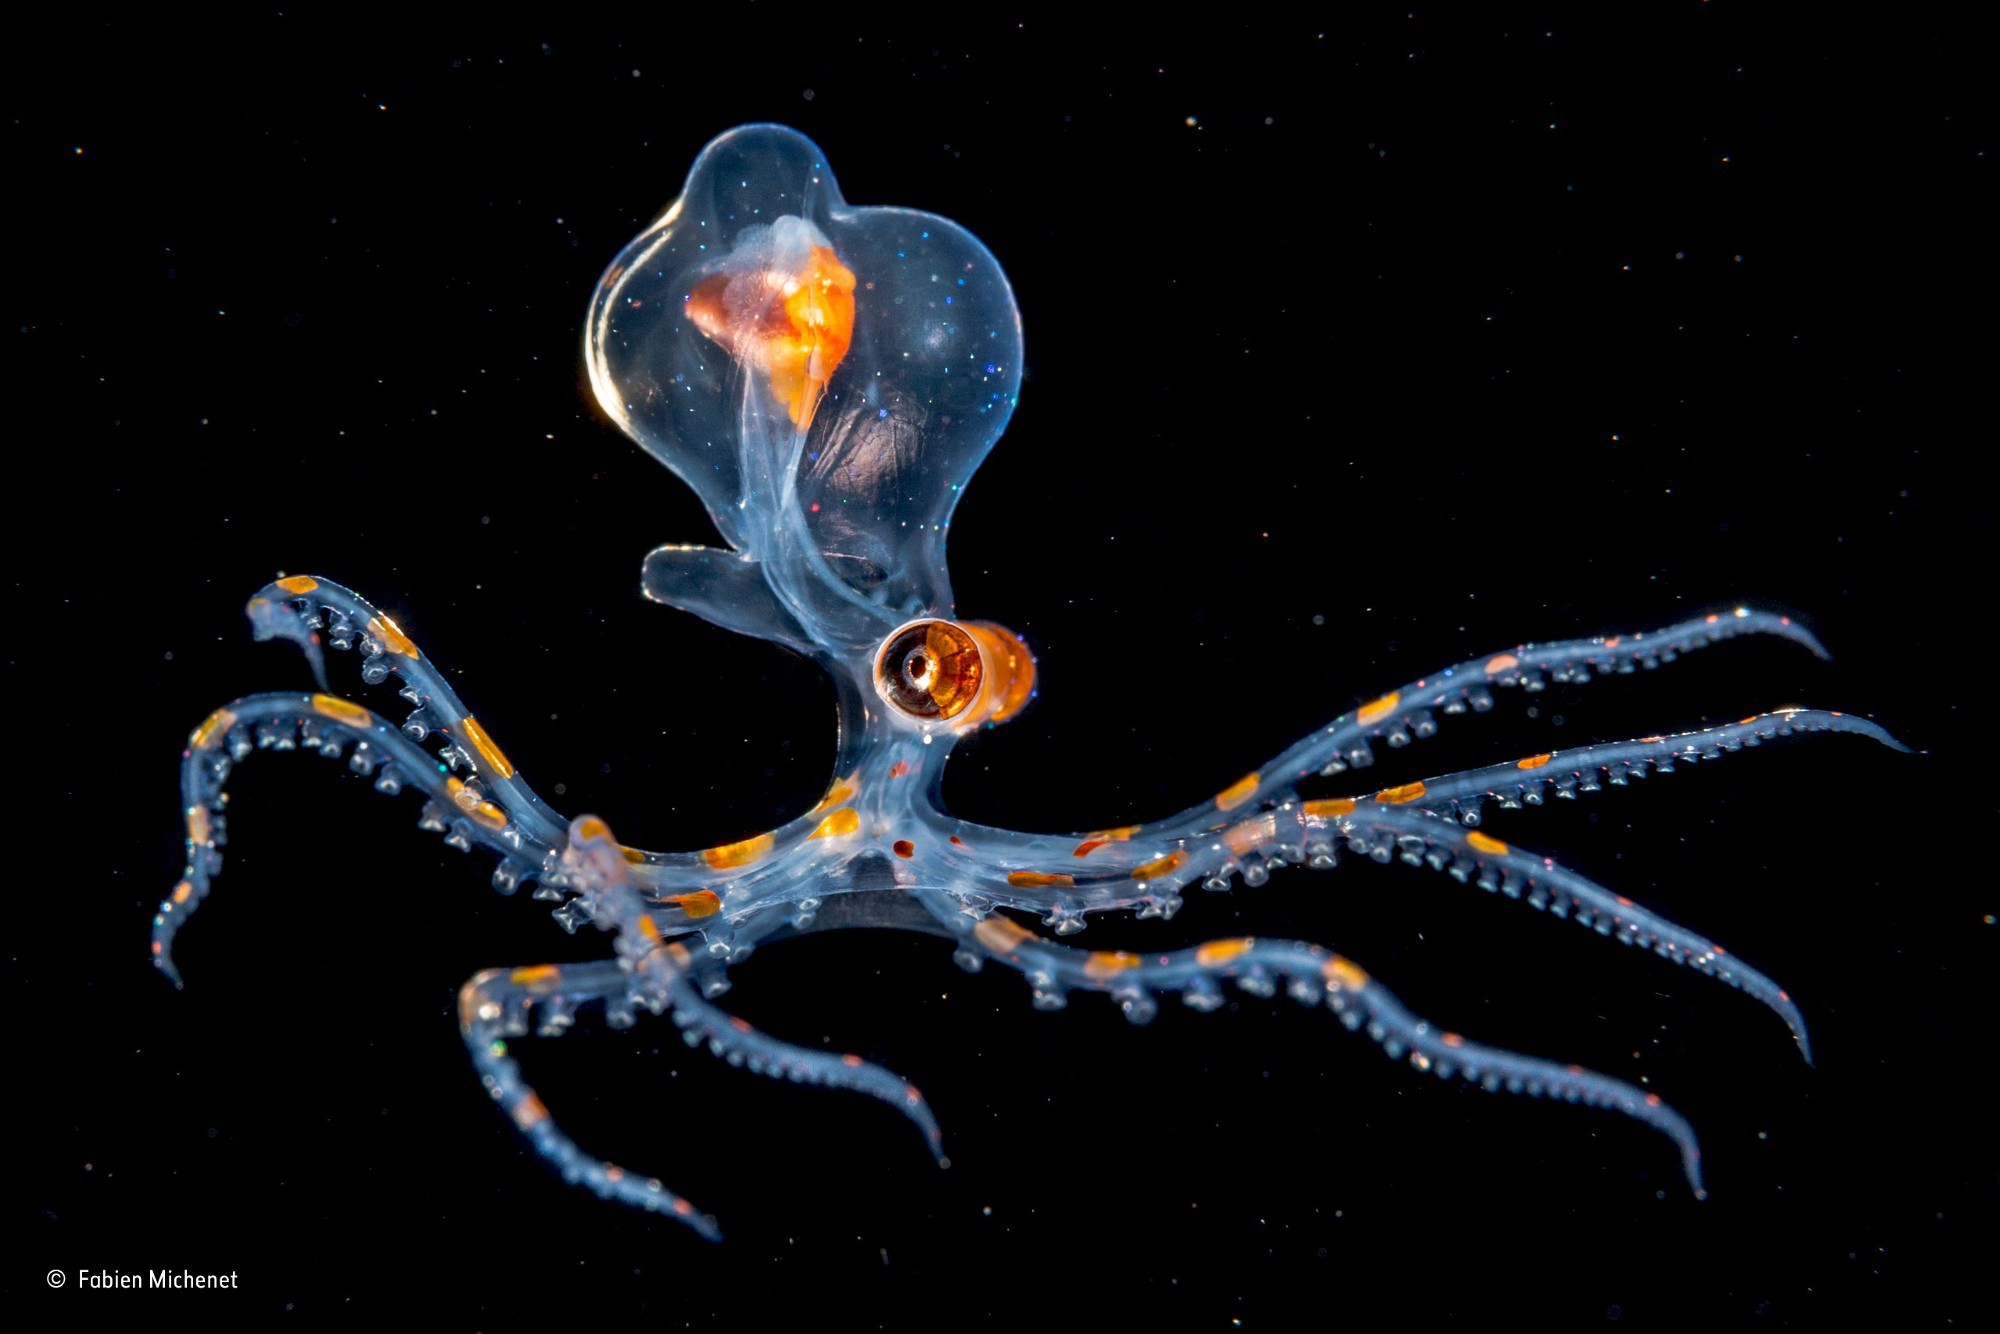 Nature Water Underwater Sea Animals Winner Photography Contests Octopus Transparency Black Backgroun 2000x1334